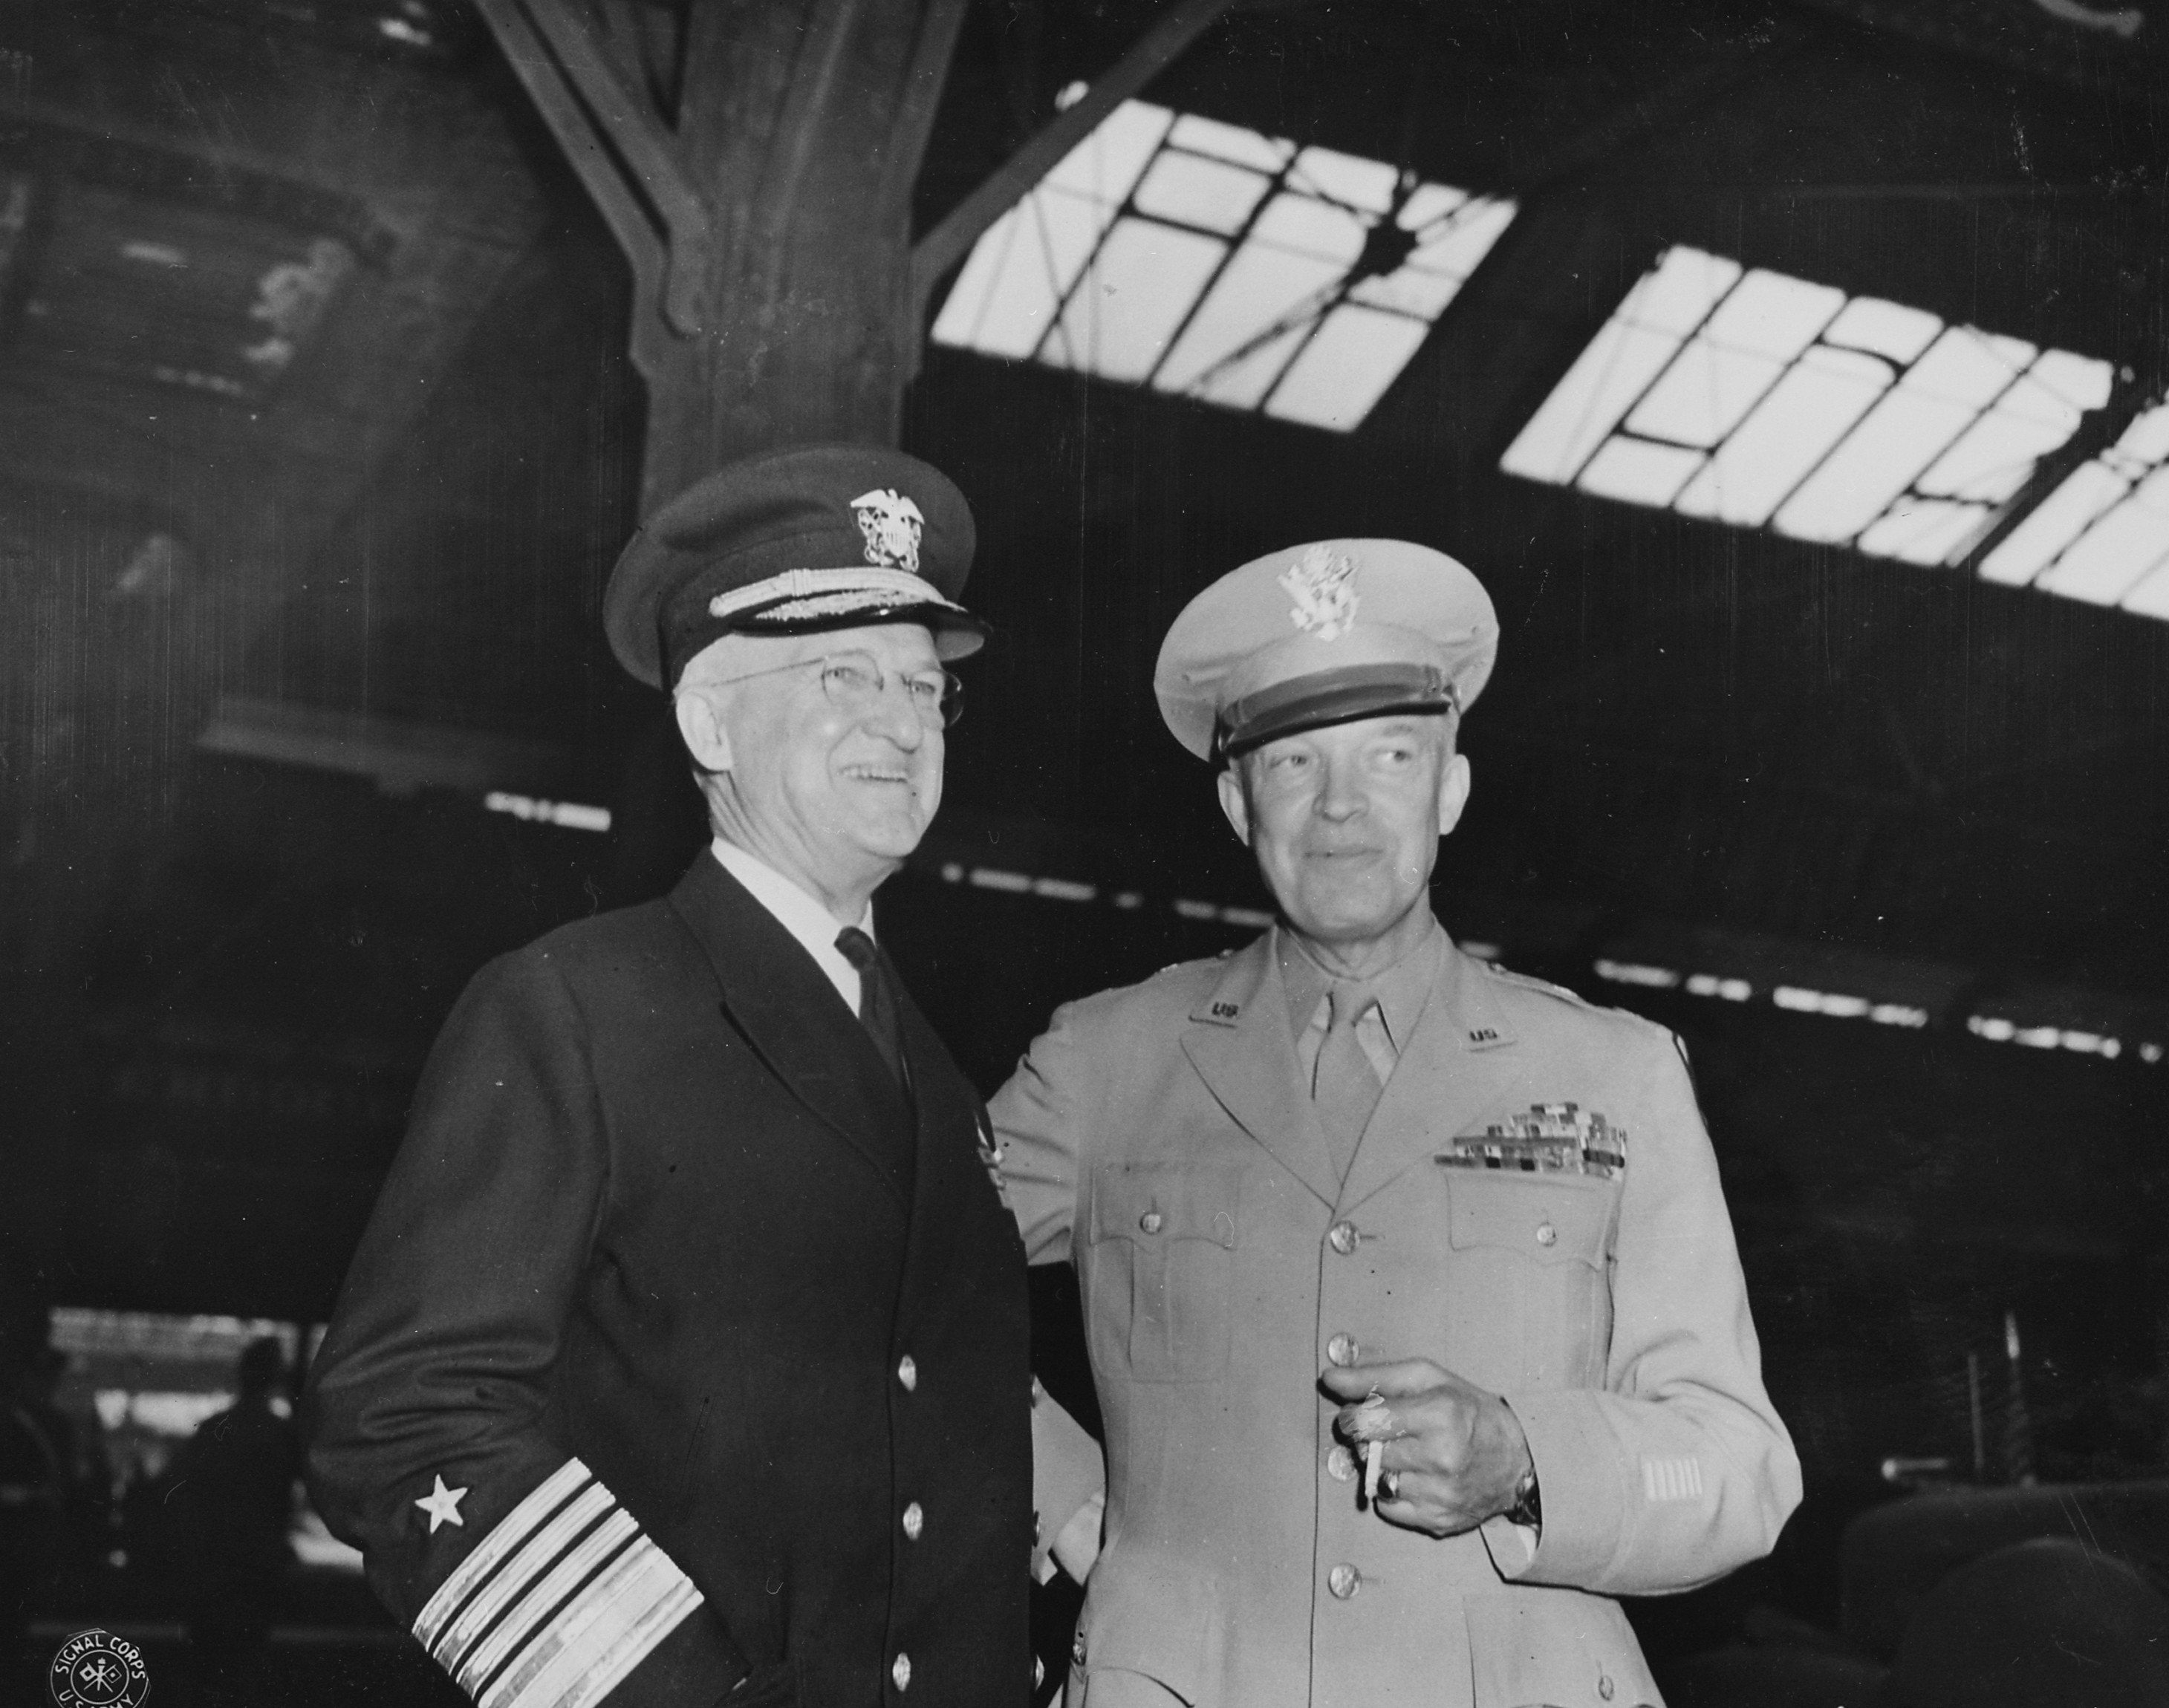 Admiral Harold Stark and General Dwight Eisenhower at Antwerp, Belgium, 15 Jul 1945, photo 1 of 2; they were awaiting the arrival of US President Harry Truman, en route for the Potsdam Conference